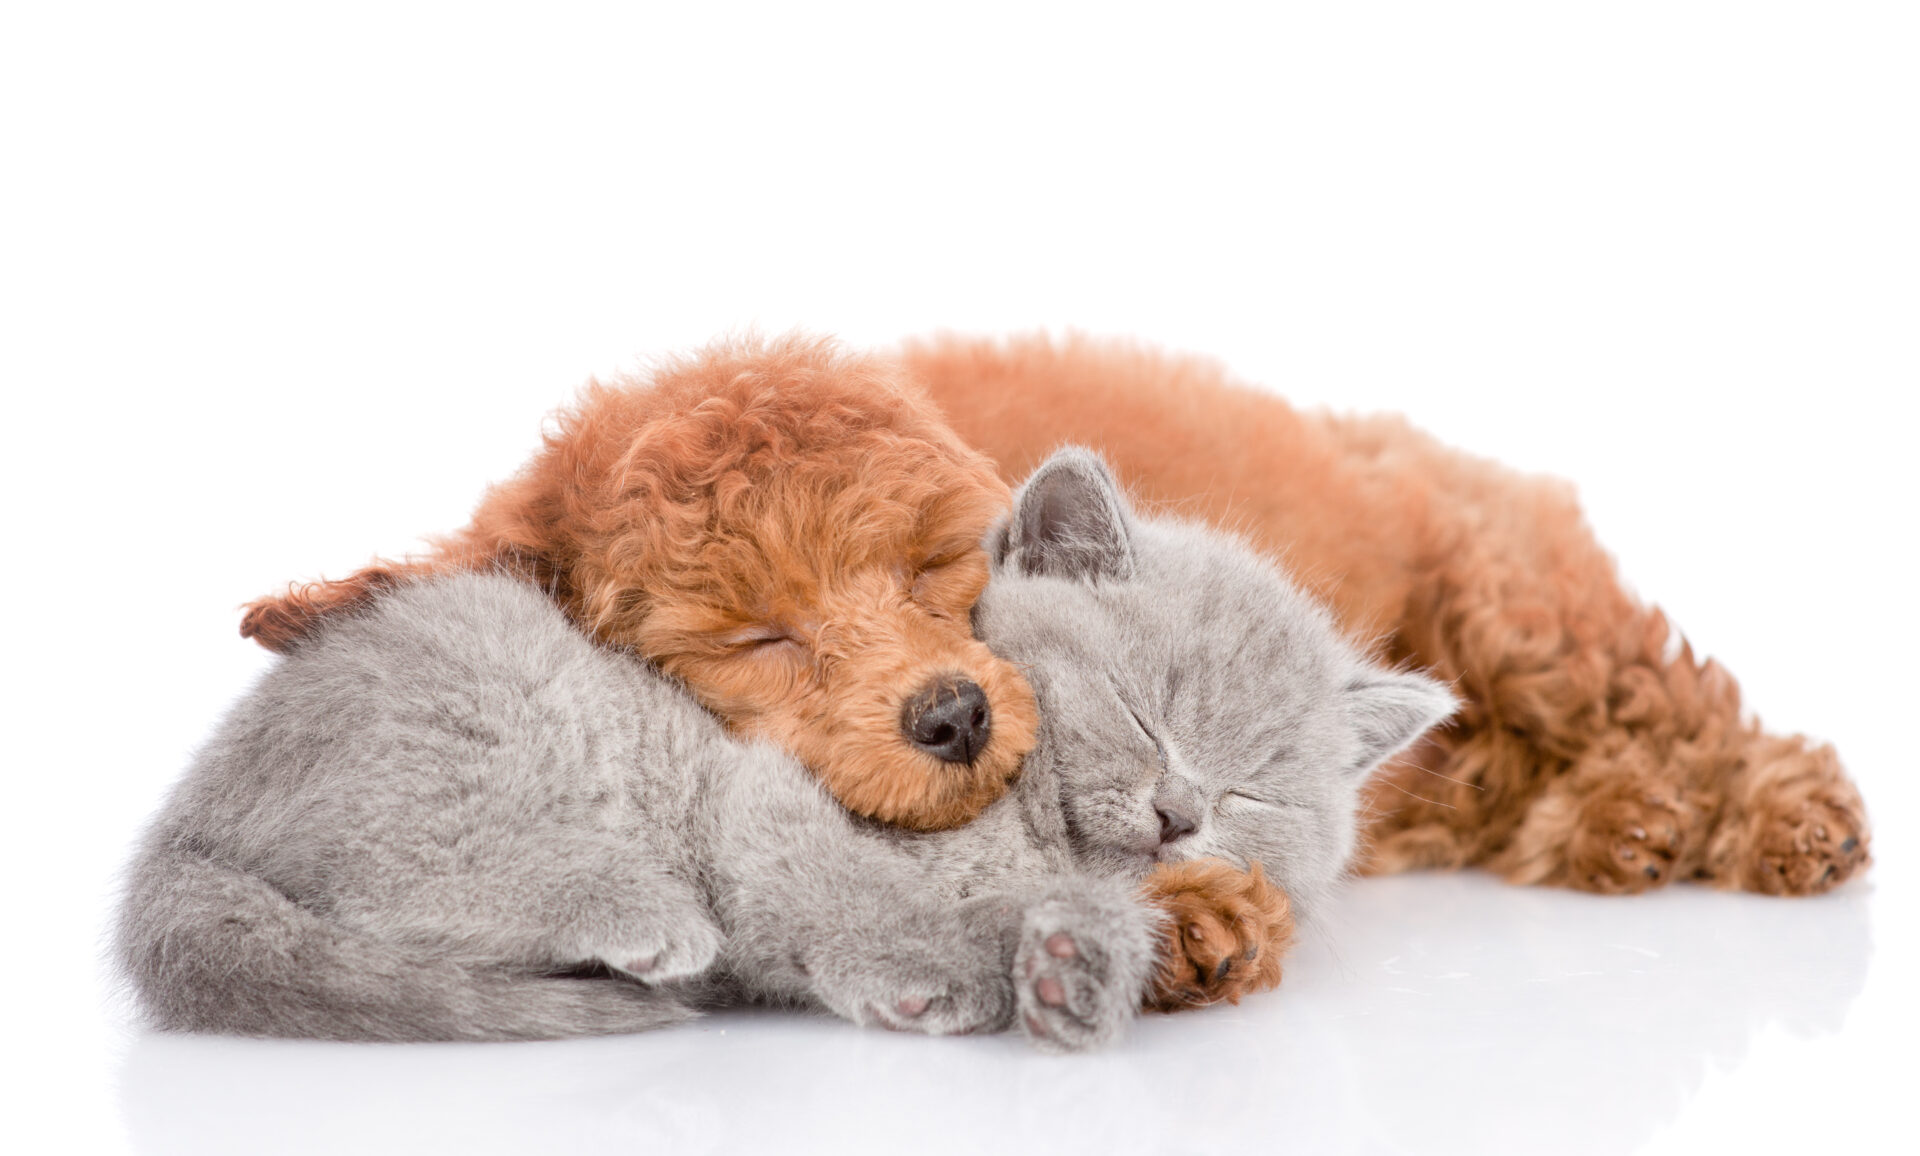 Poodle puppy and tiny kitten sleeping together